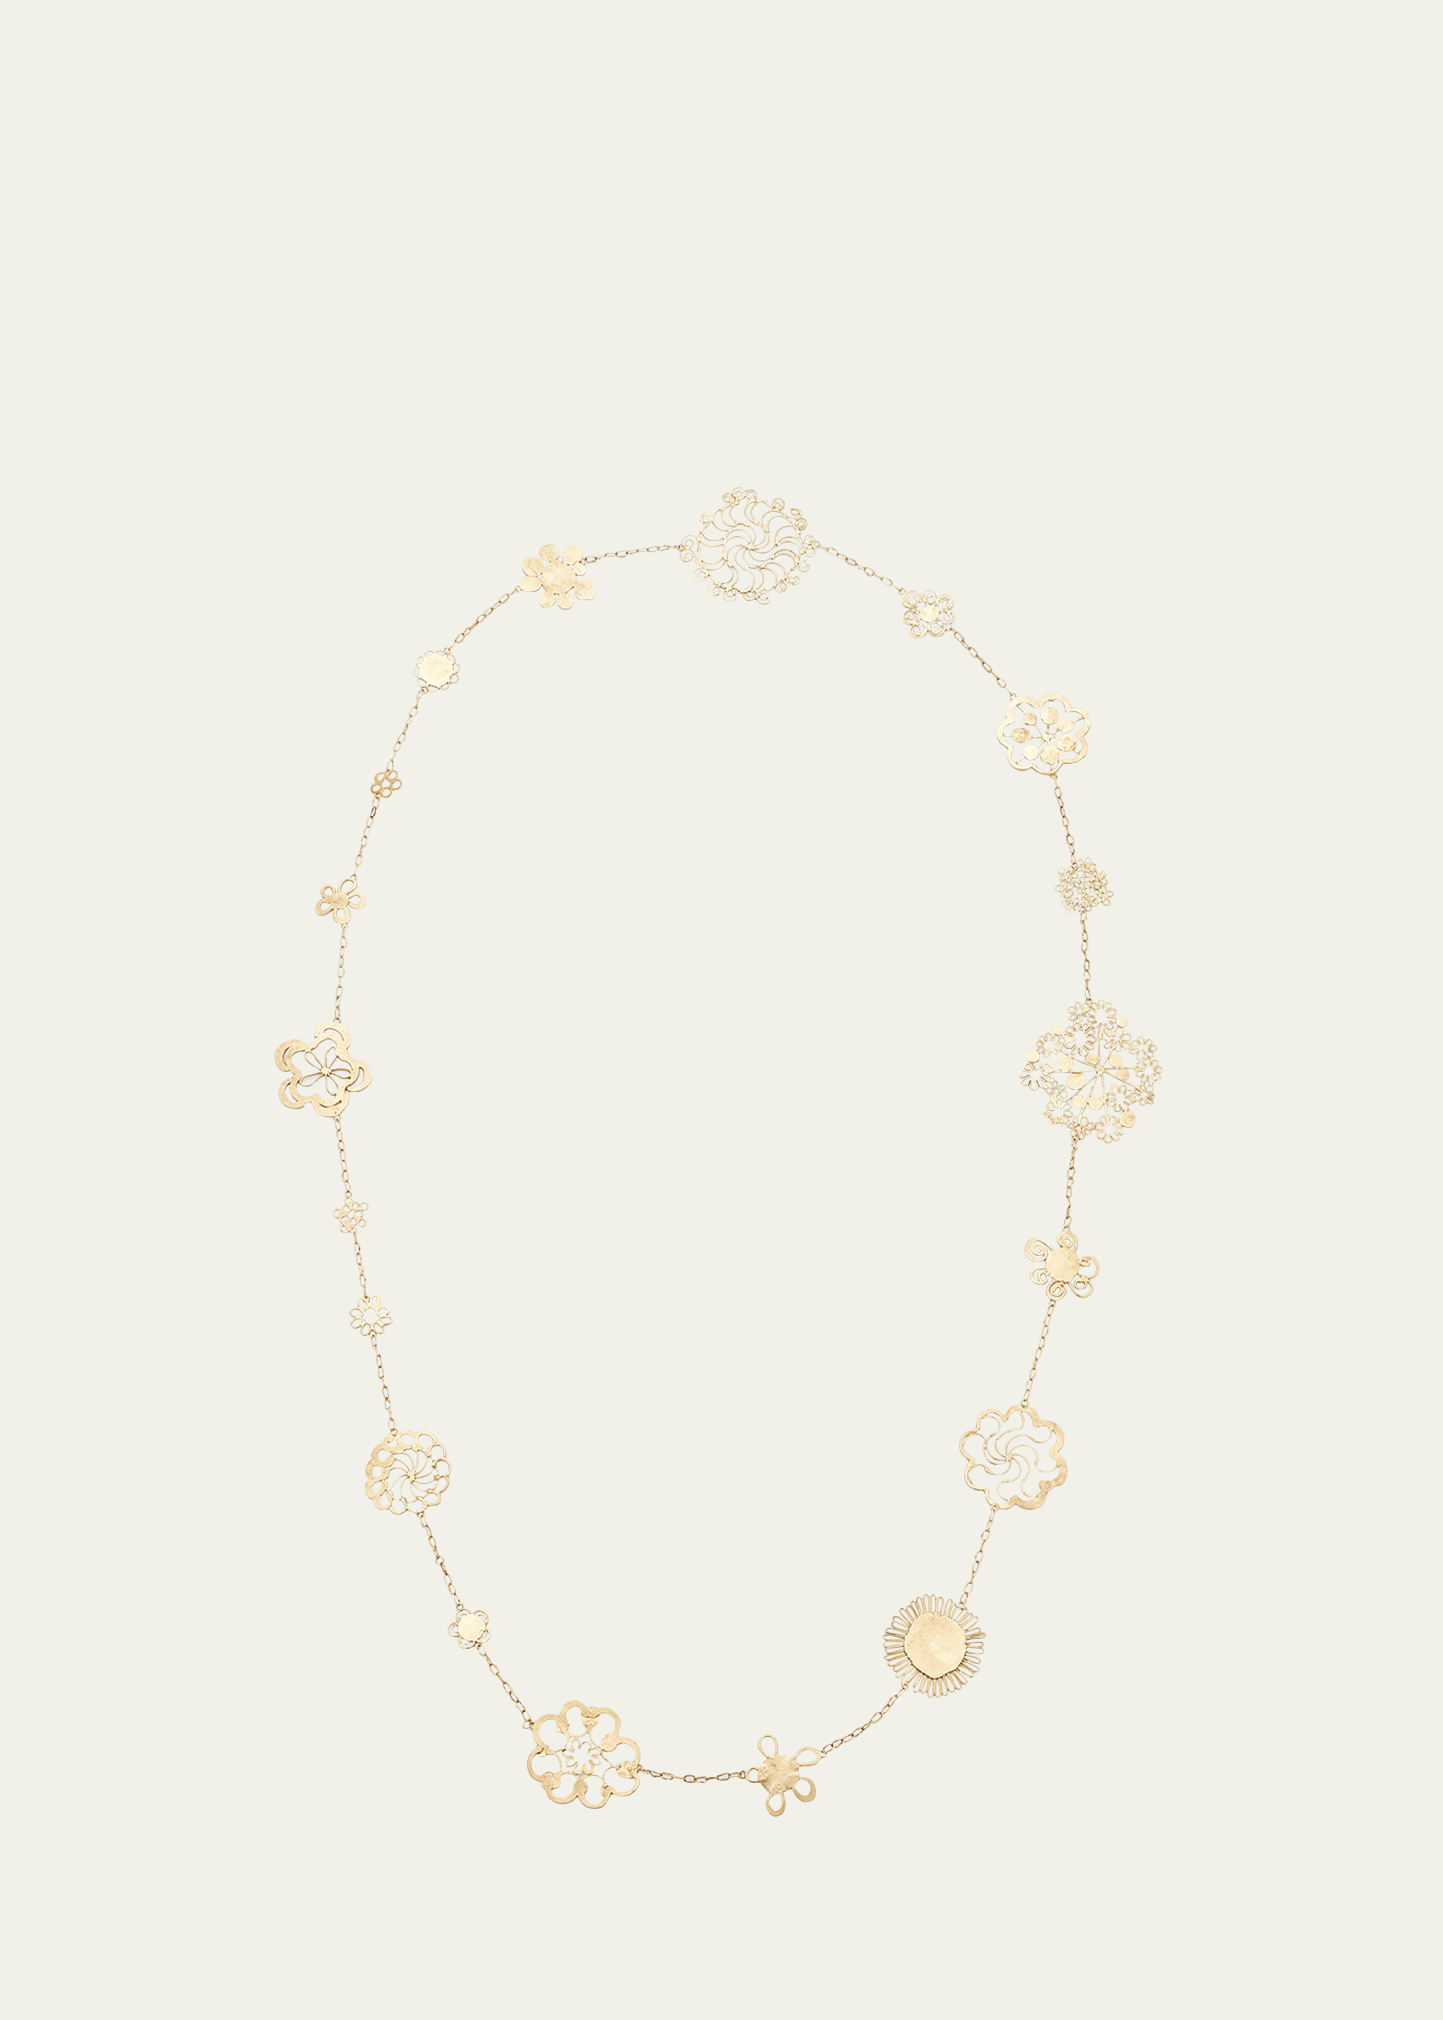 JUDY GEIB Opera-Length Flowery Necklace in 18K Gold